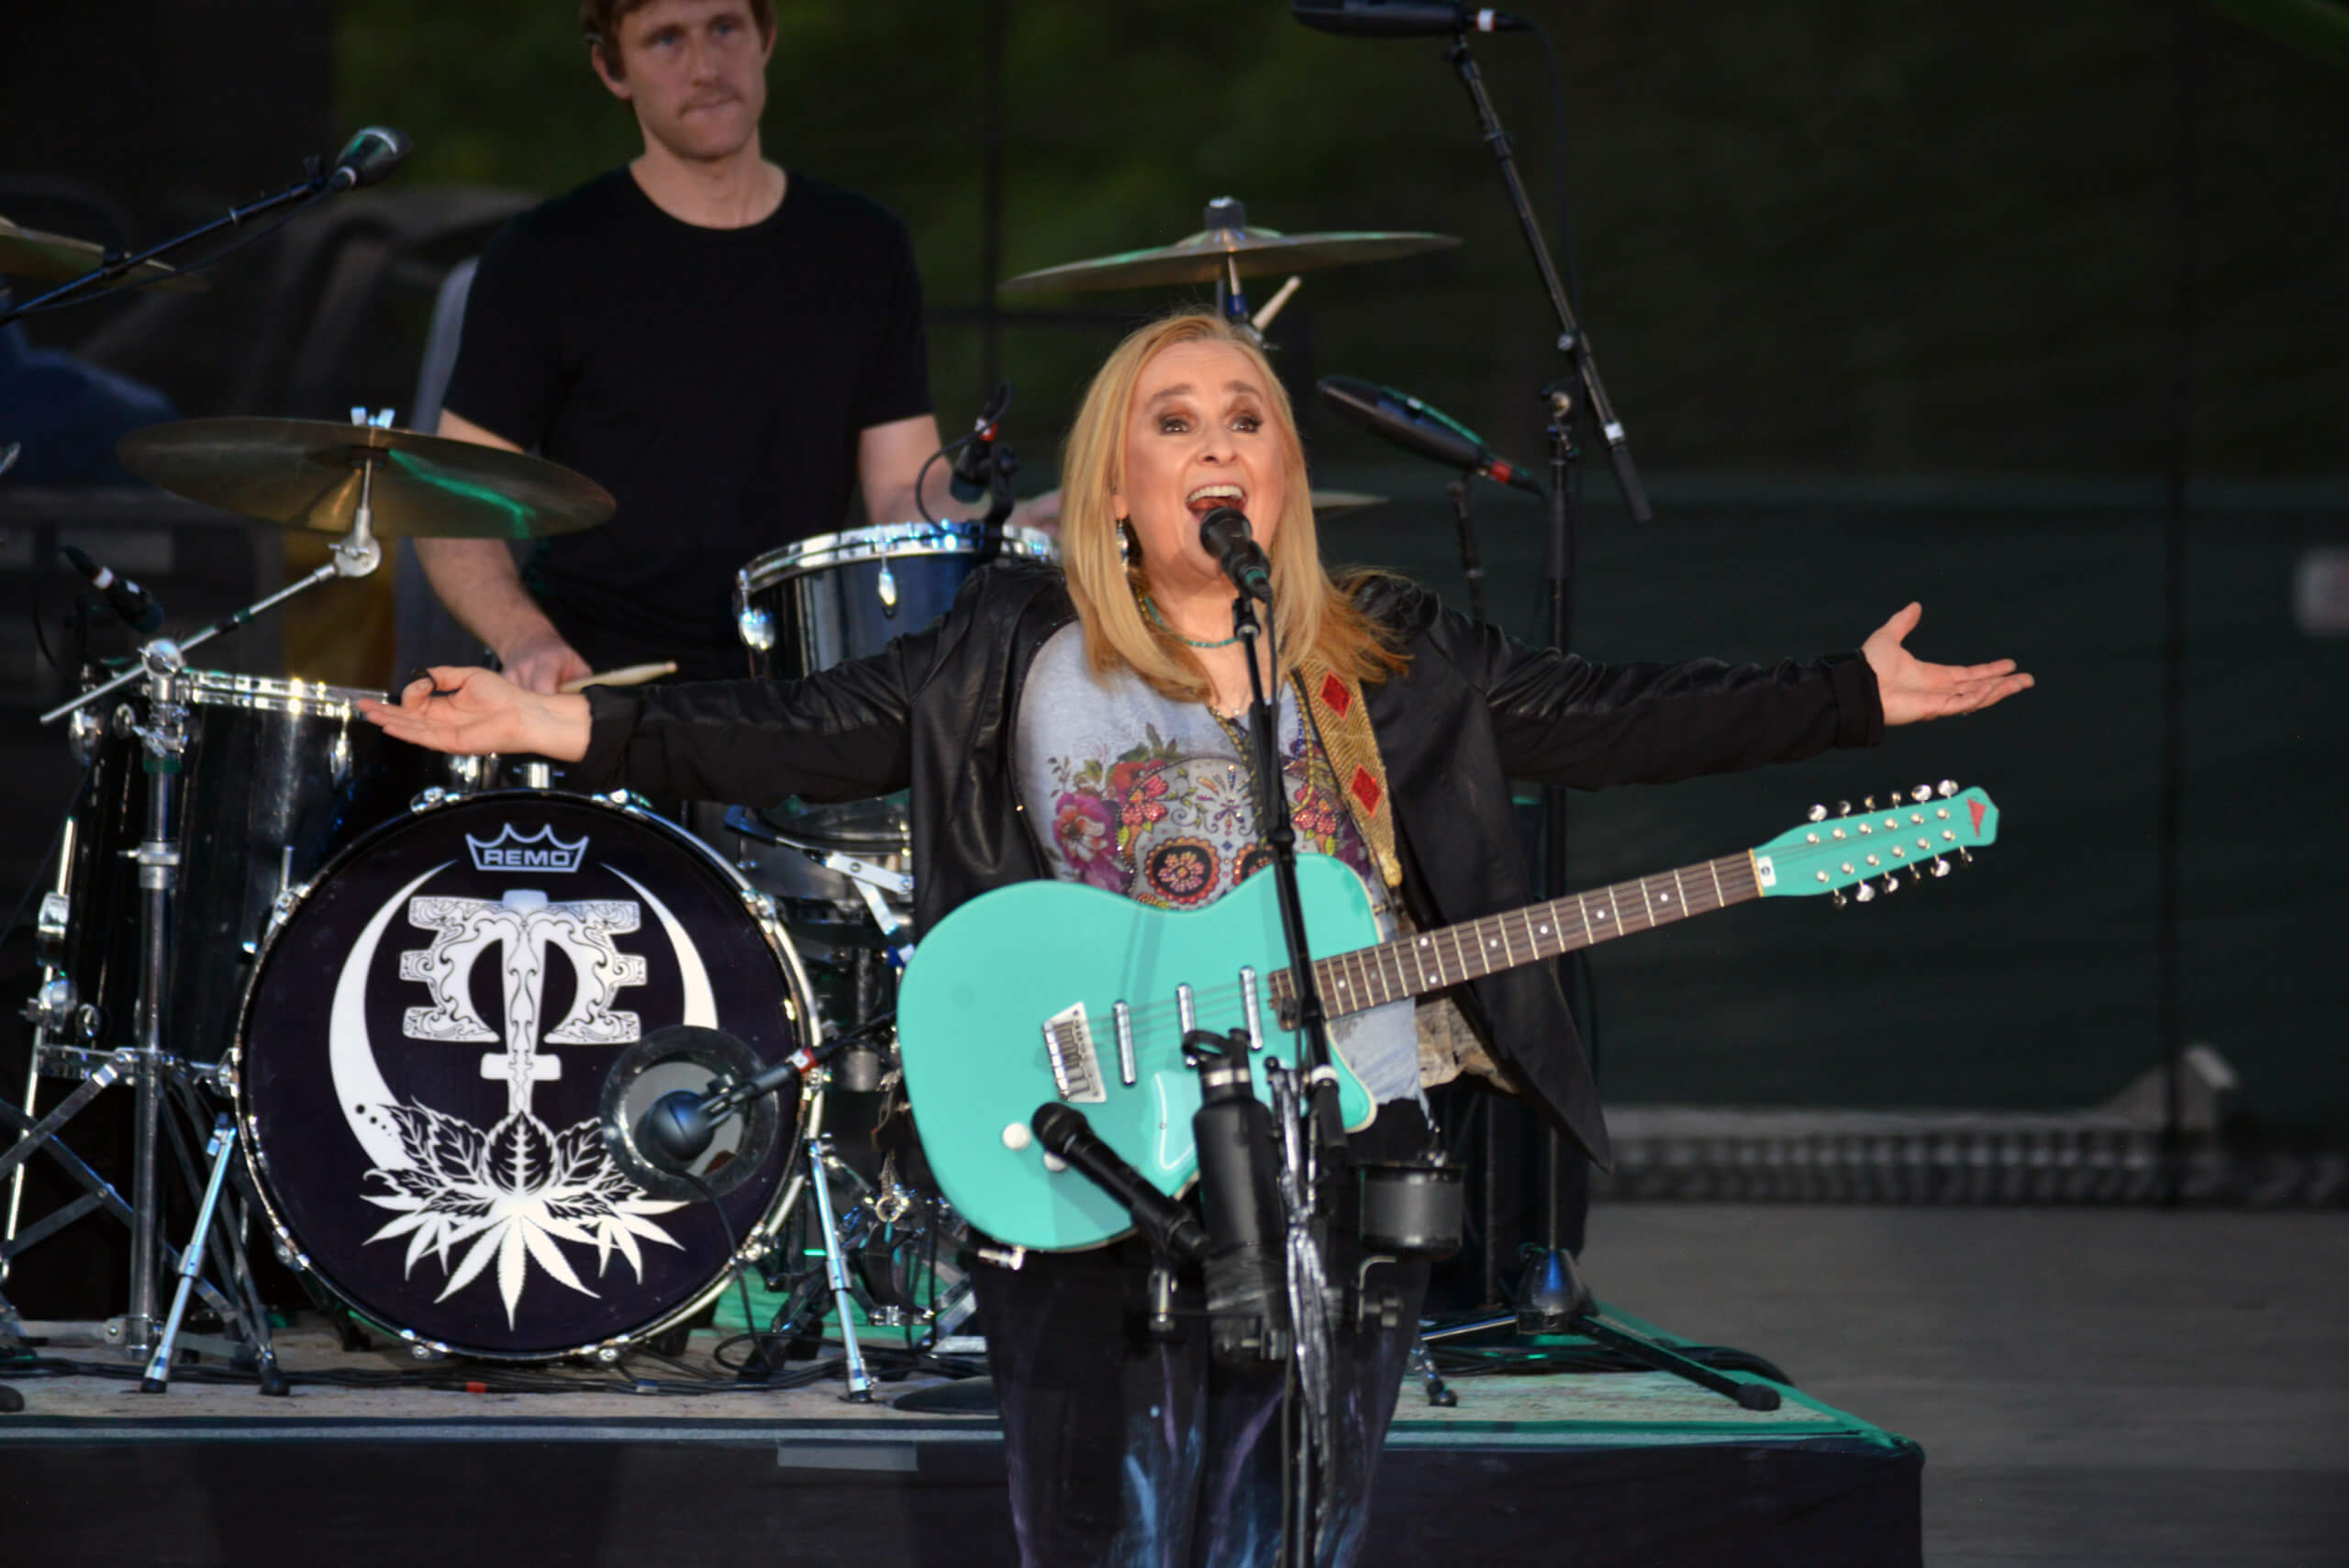 Melissa Etheridge performs live music during an outdoor concert at Hudson Gardens